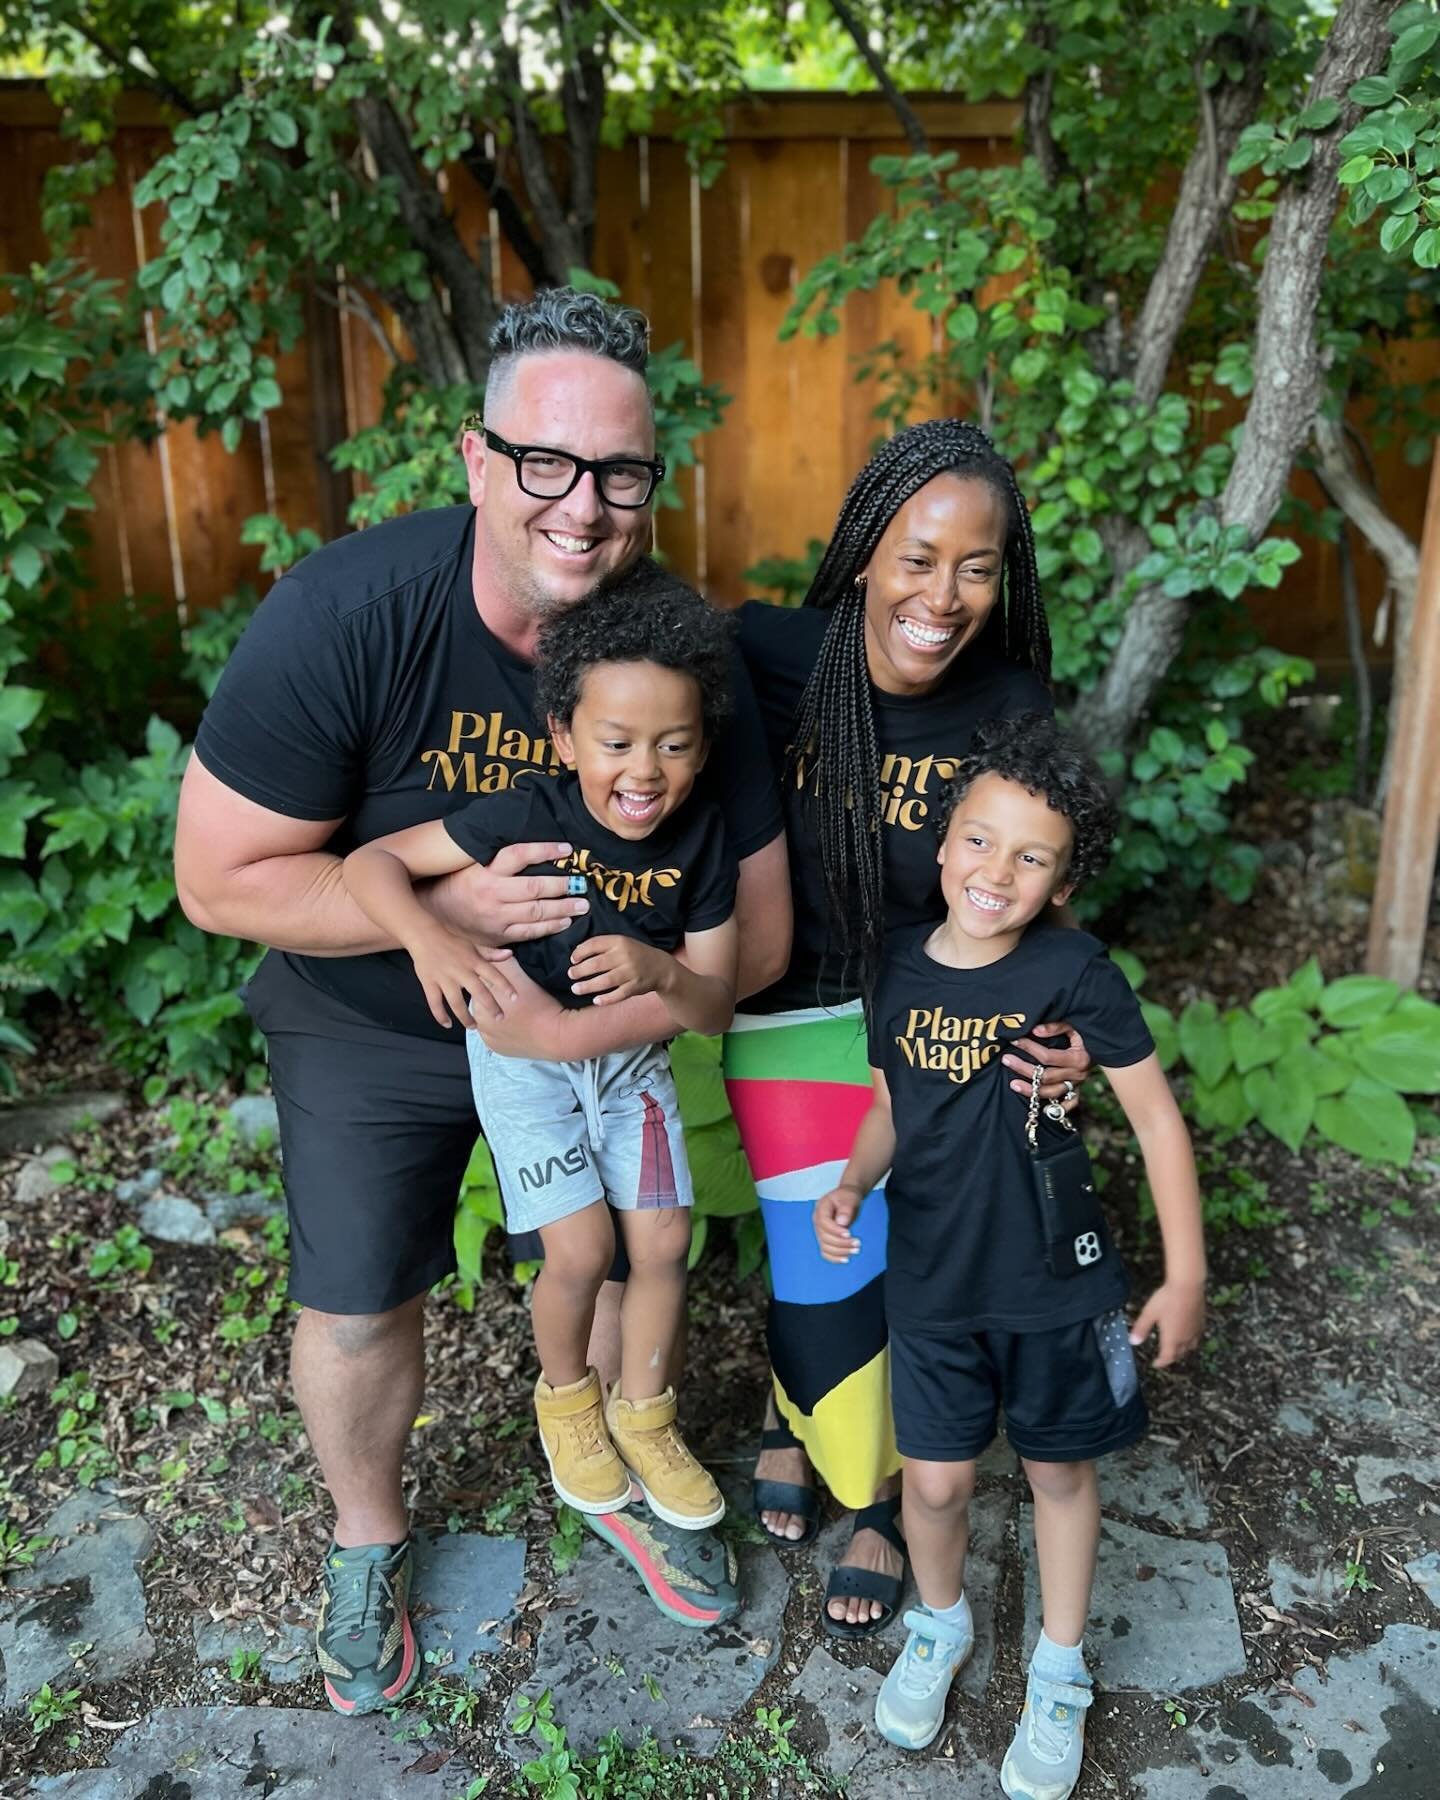 As a small business owner and mother, involving my boys in my business mission is both important and fulfilling. They serve as taste testers, offer excellent recipe advice, and excel as juice deliverers. More than that, they are my biggest supporters